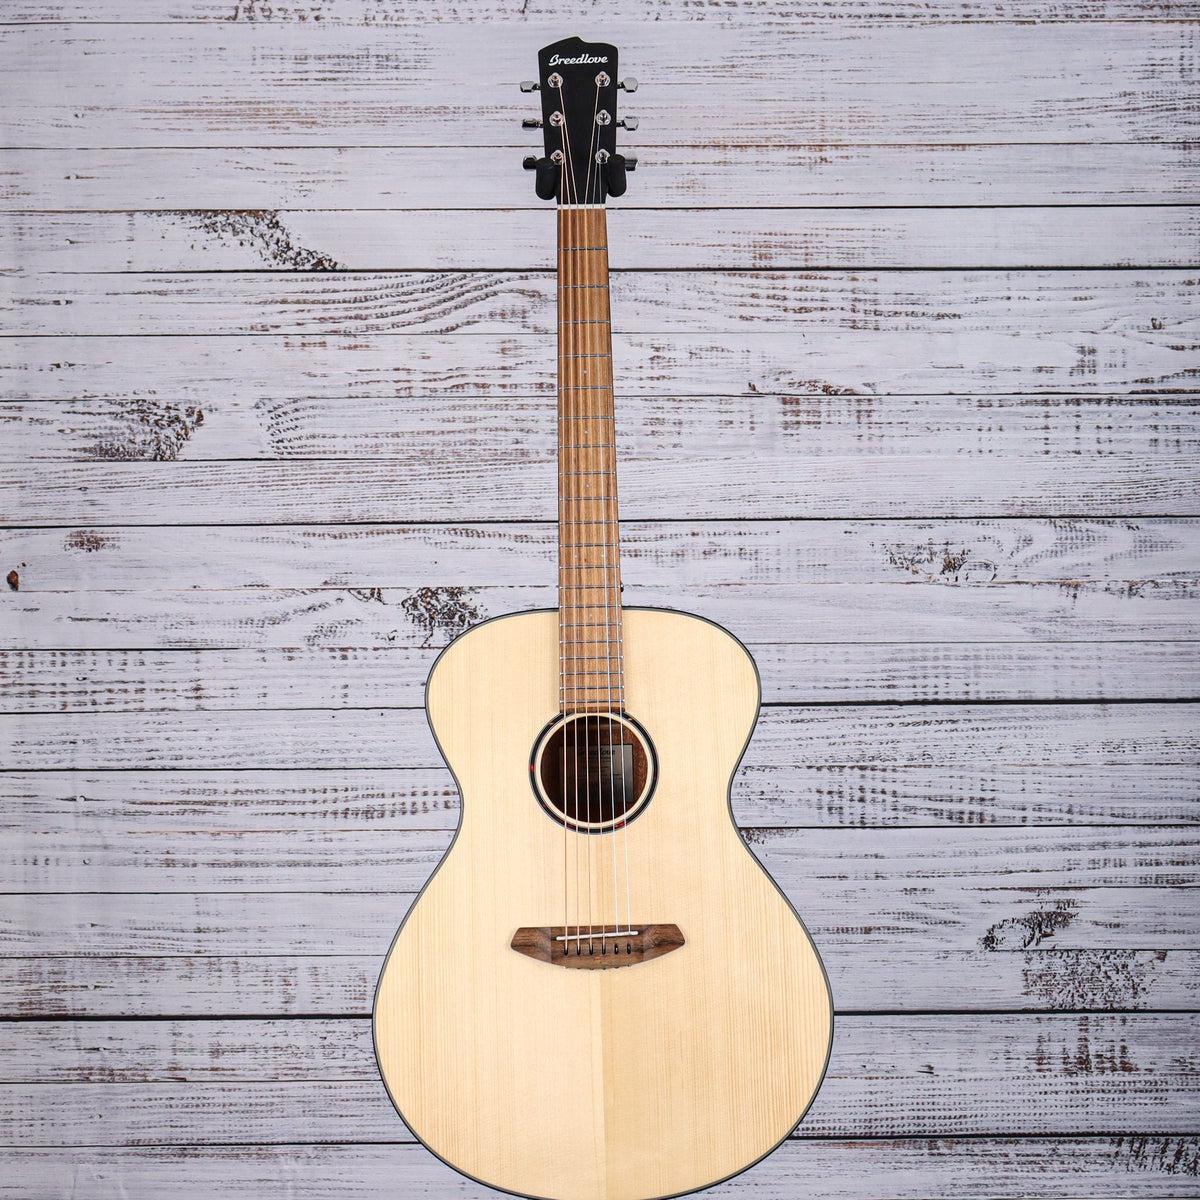 Breedlove Discovery S Concerto Acoustic Guitar | Natural Satin